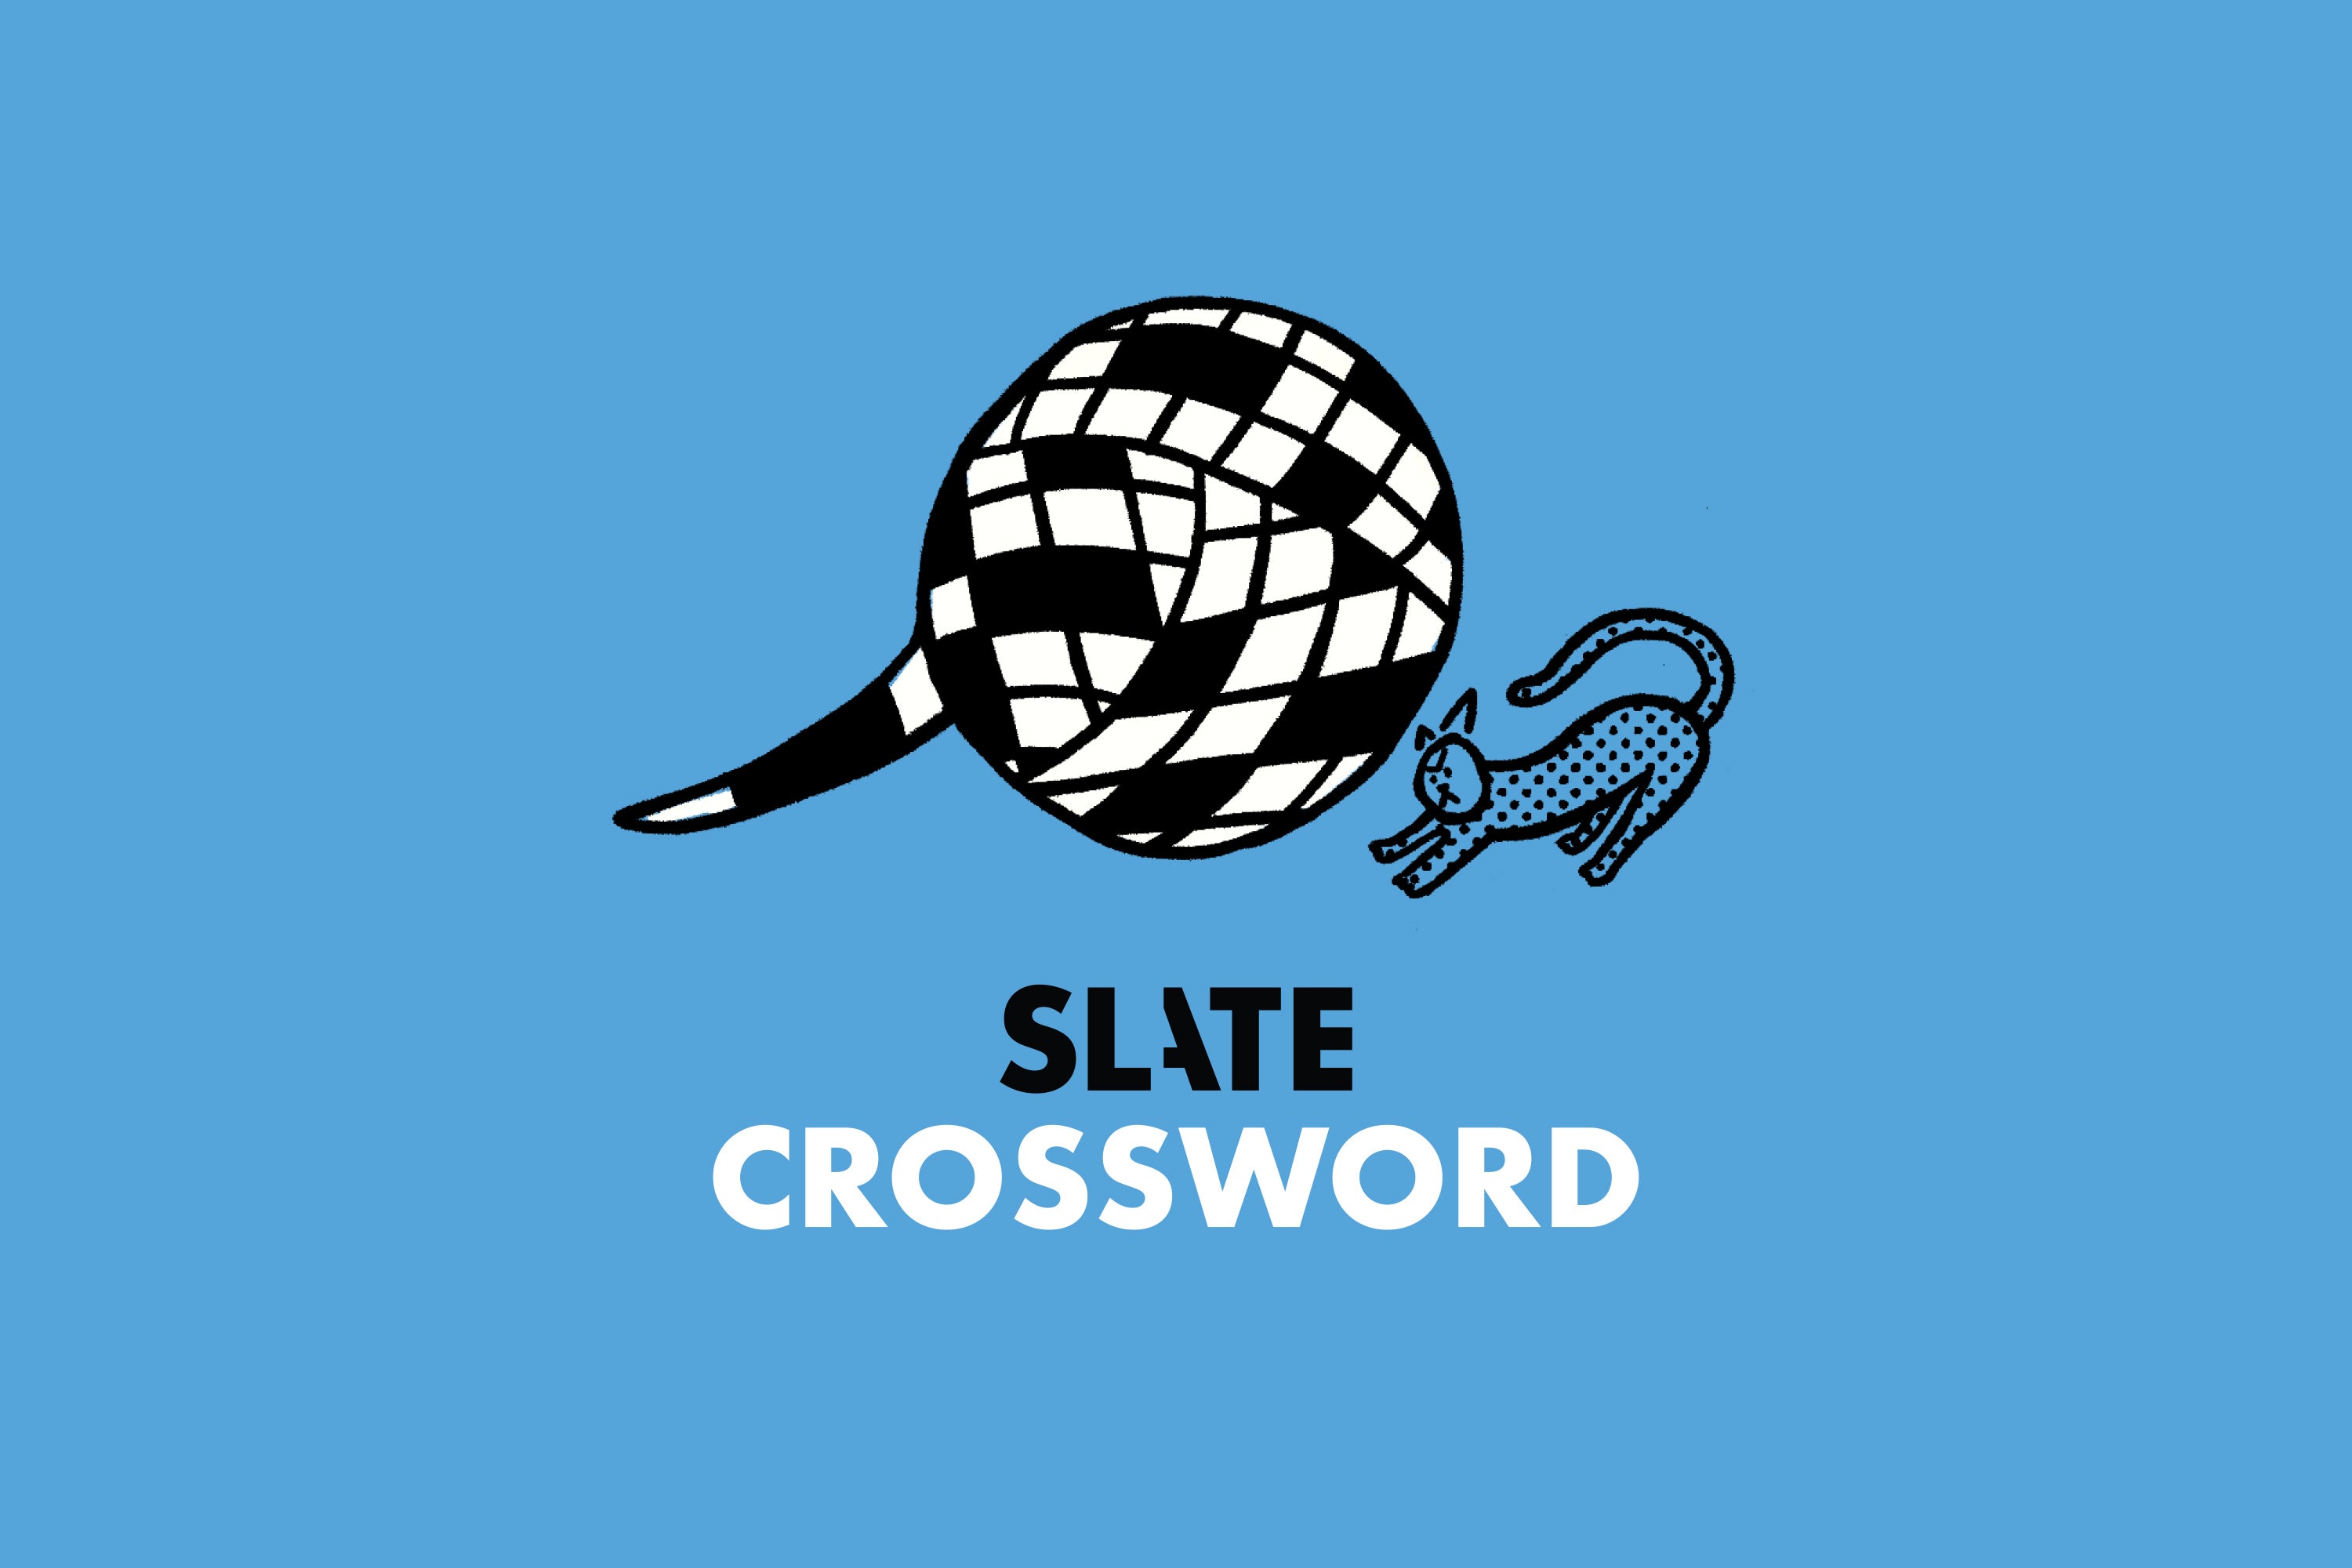 Slate Crossword: Corsair of the Cosmos (Eleven Letters)